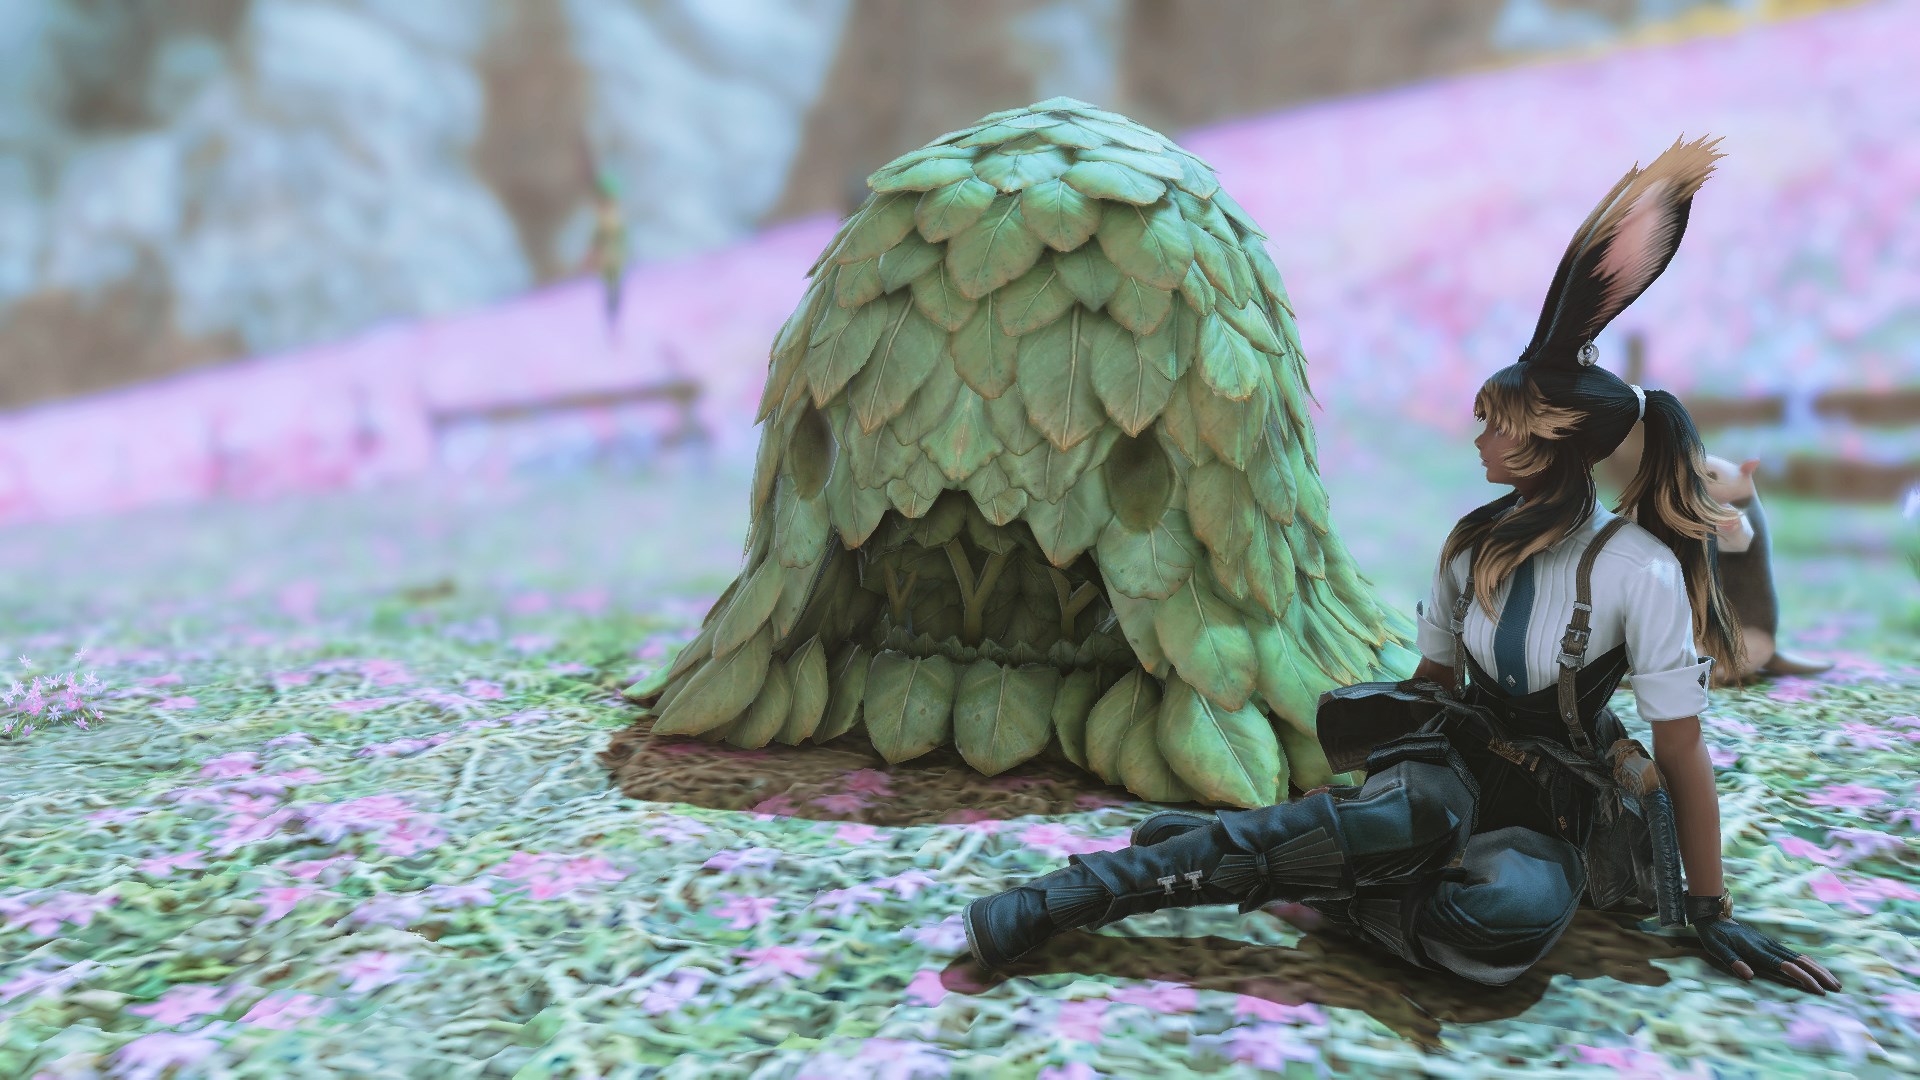 A Viera sits and stares as a living pile of leaves known as Anden